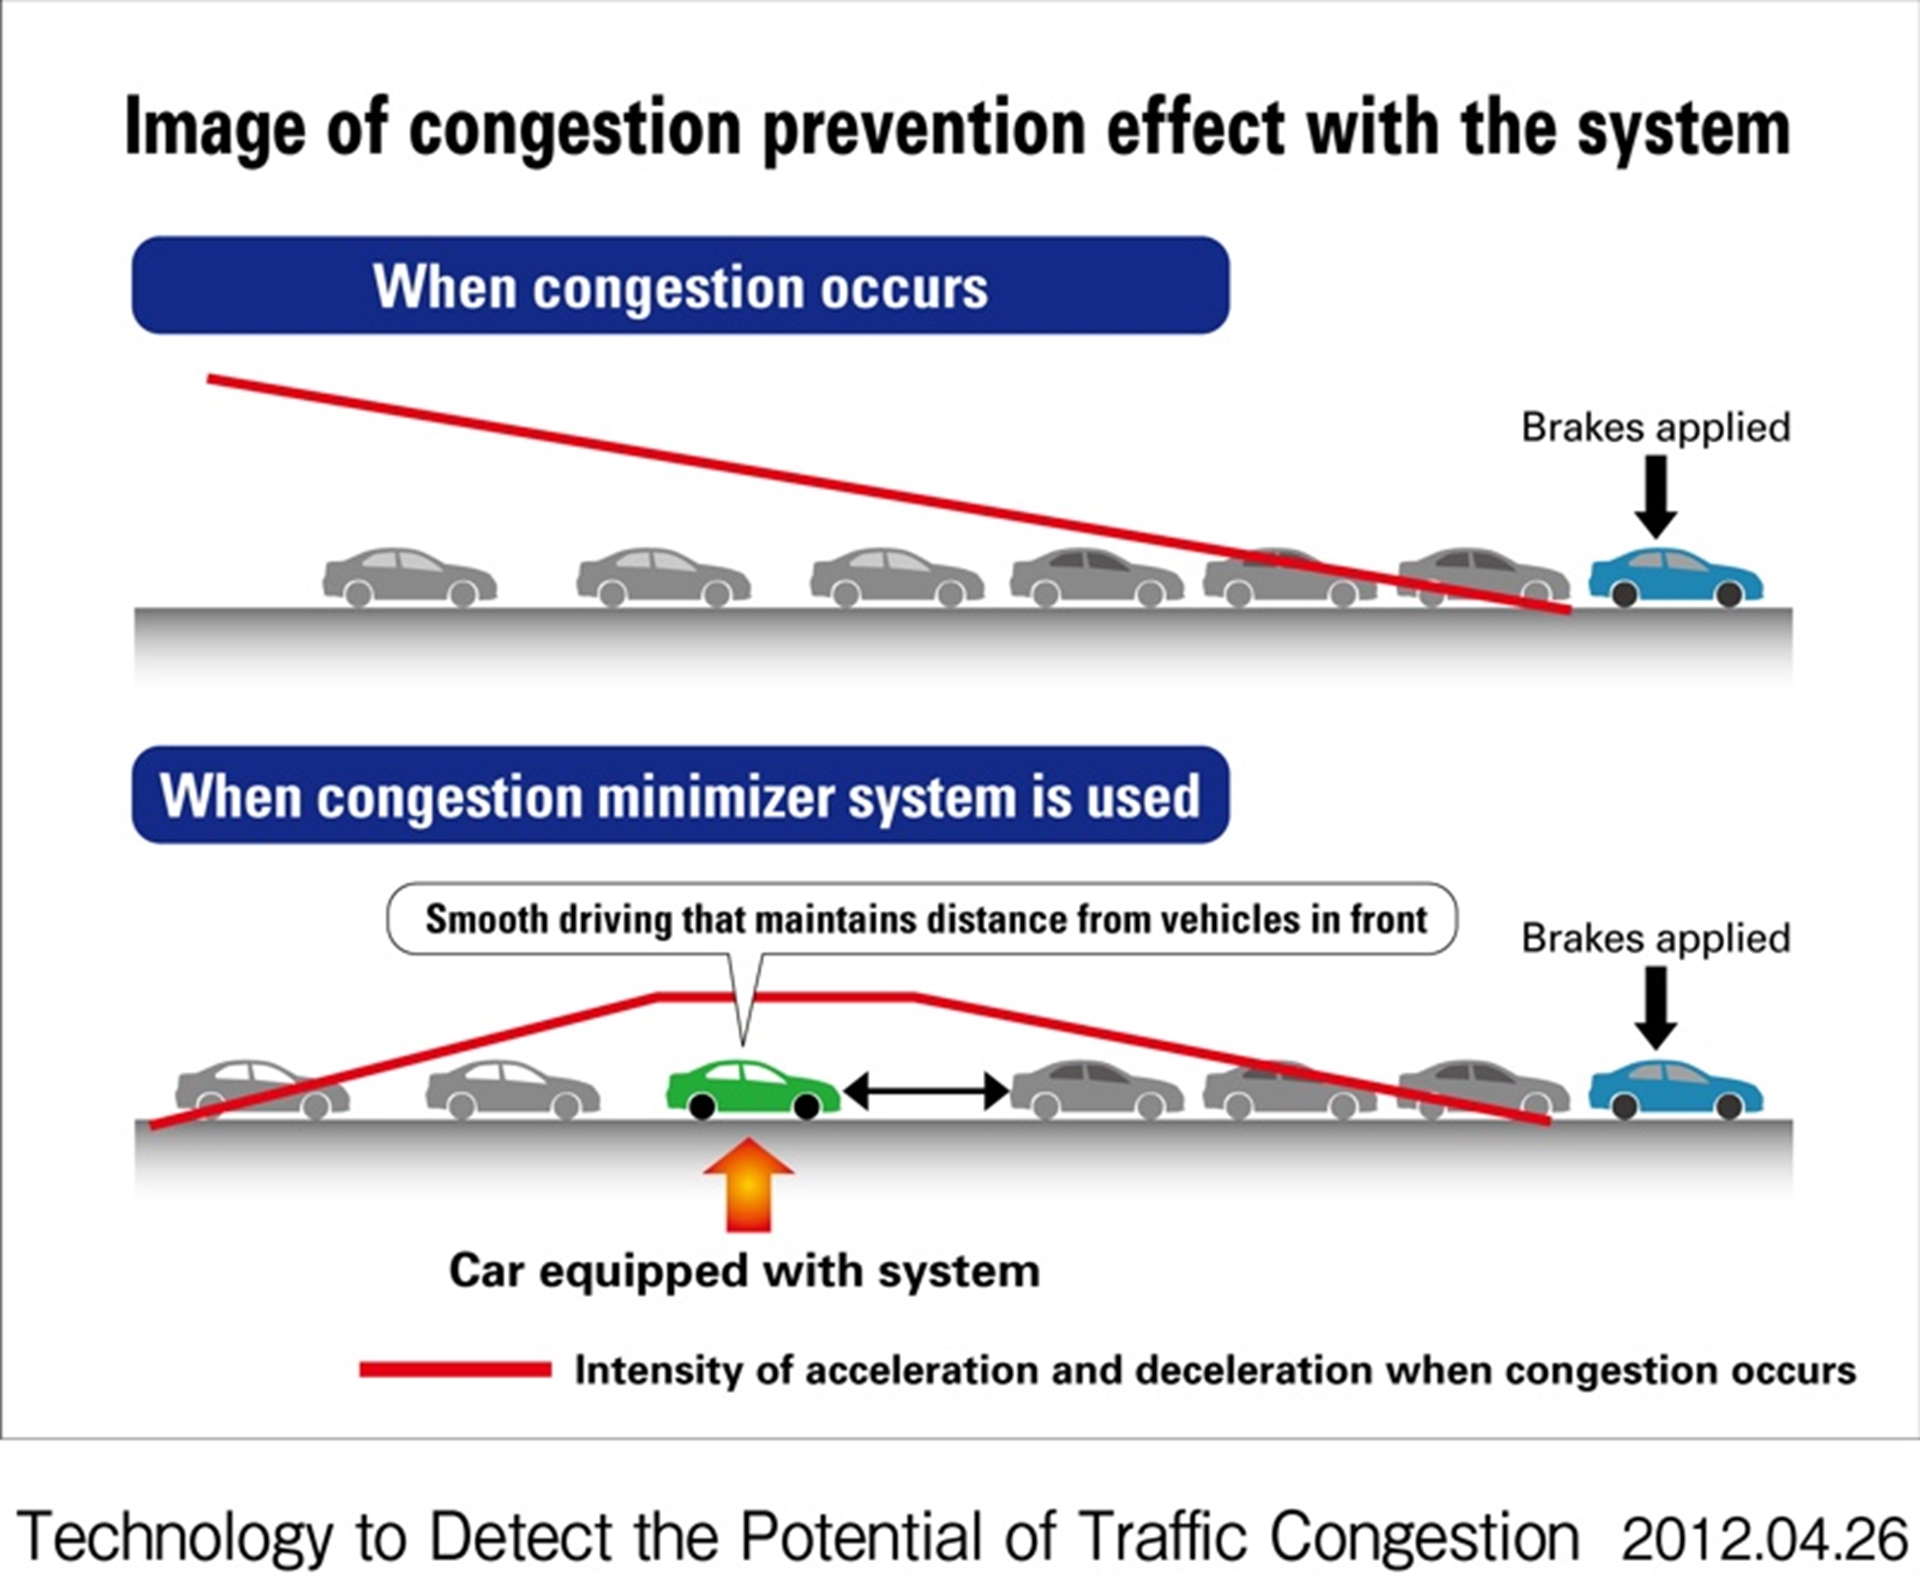 Honda Develops World’s First Technology which Aims to Prevent Traffic Jams